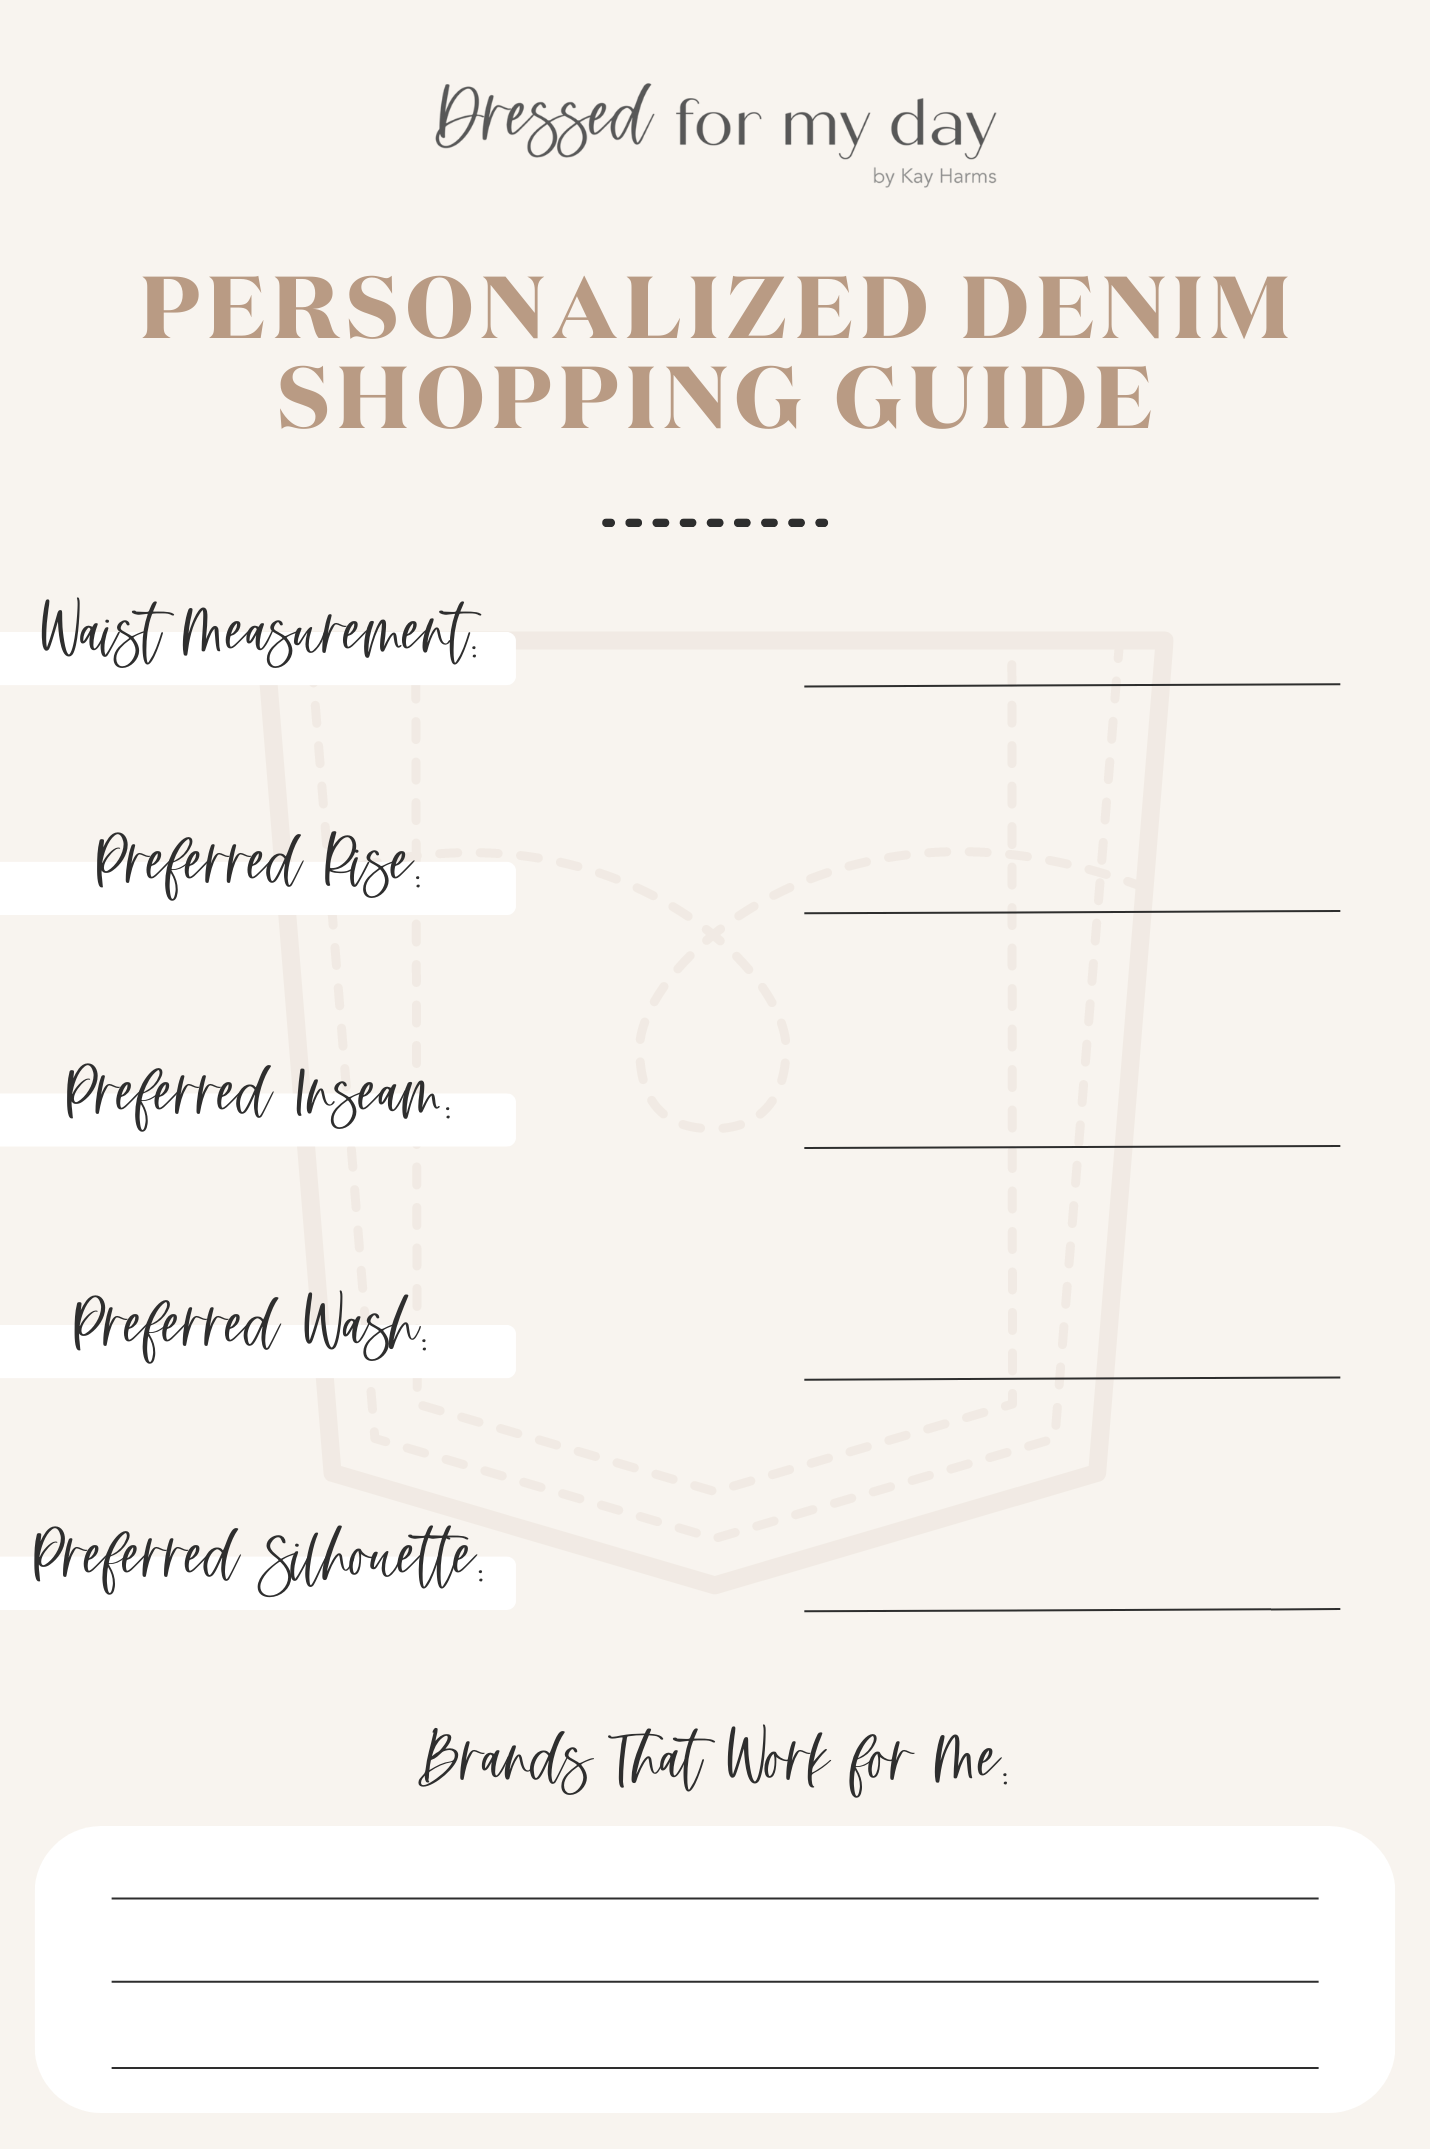 Personalized Denim Shopping Guide